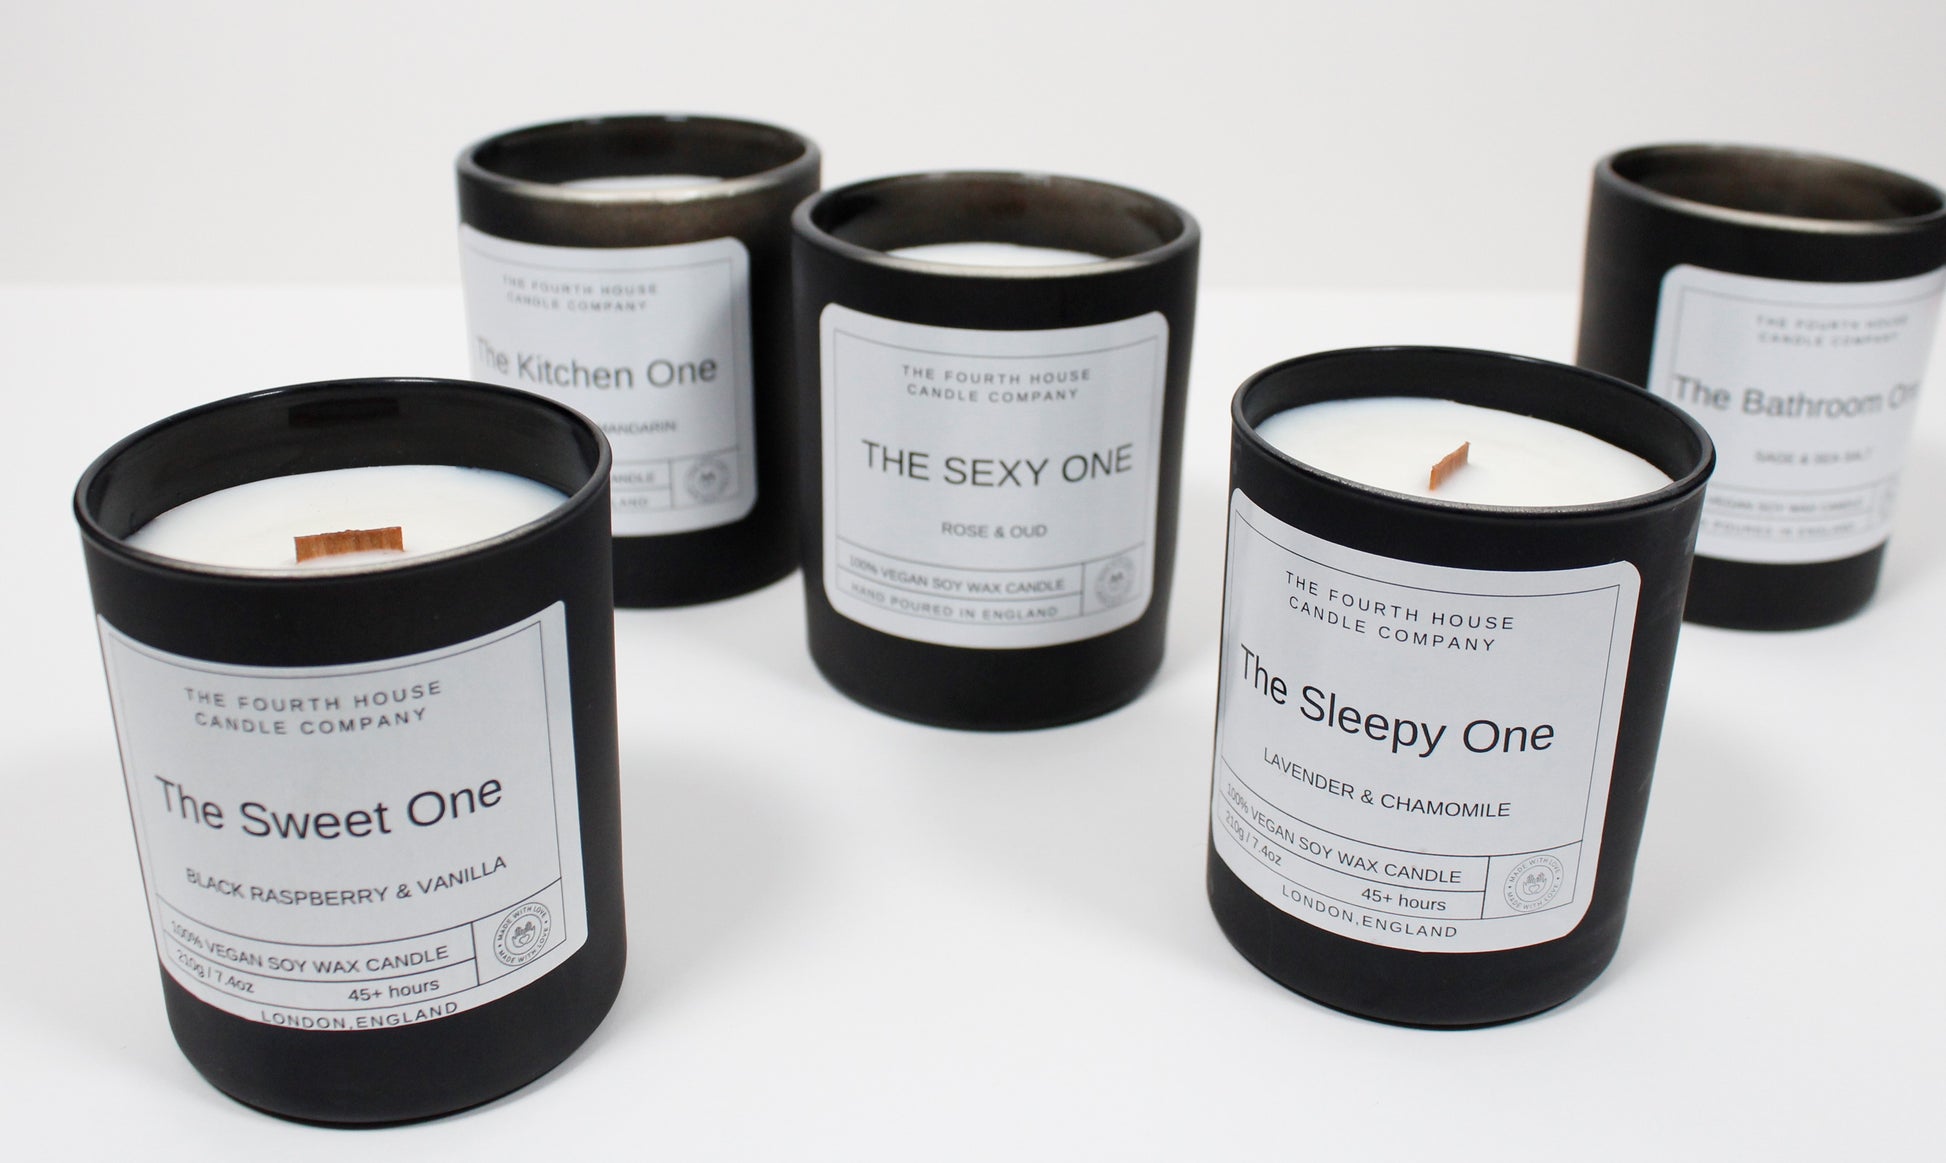 8oz Soy Wax Candles / Free Ship over $35 /Herbal Floral / Handmade / Wood  Wick